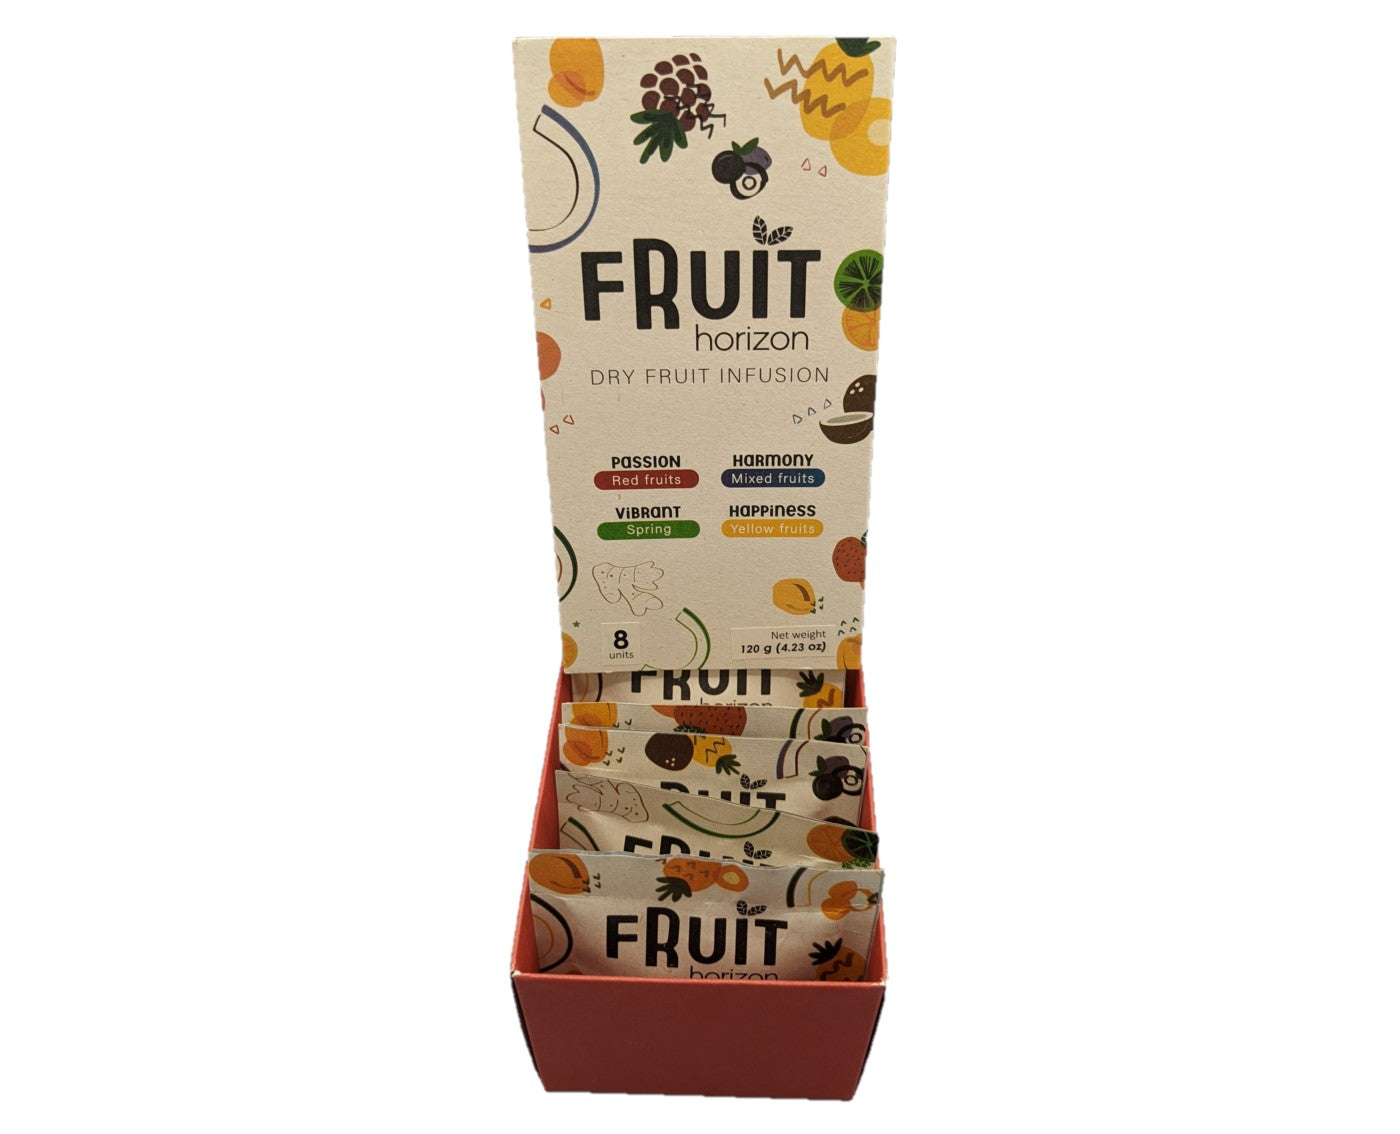 Fruit Horizon fruit infusion mix pack in gift box 8 x 15g